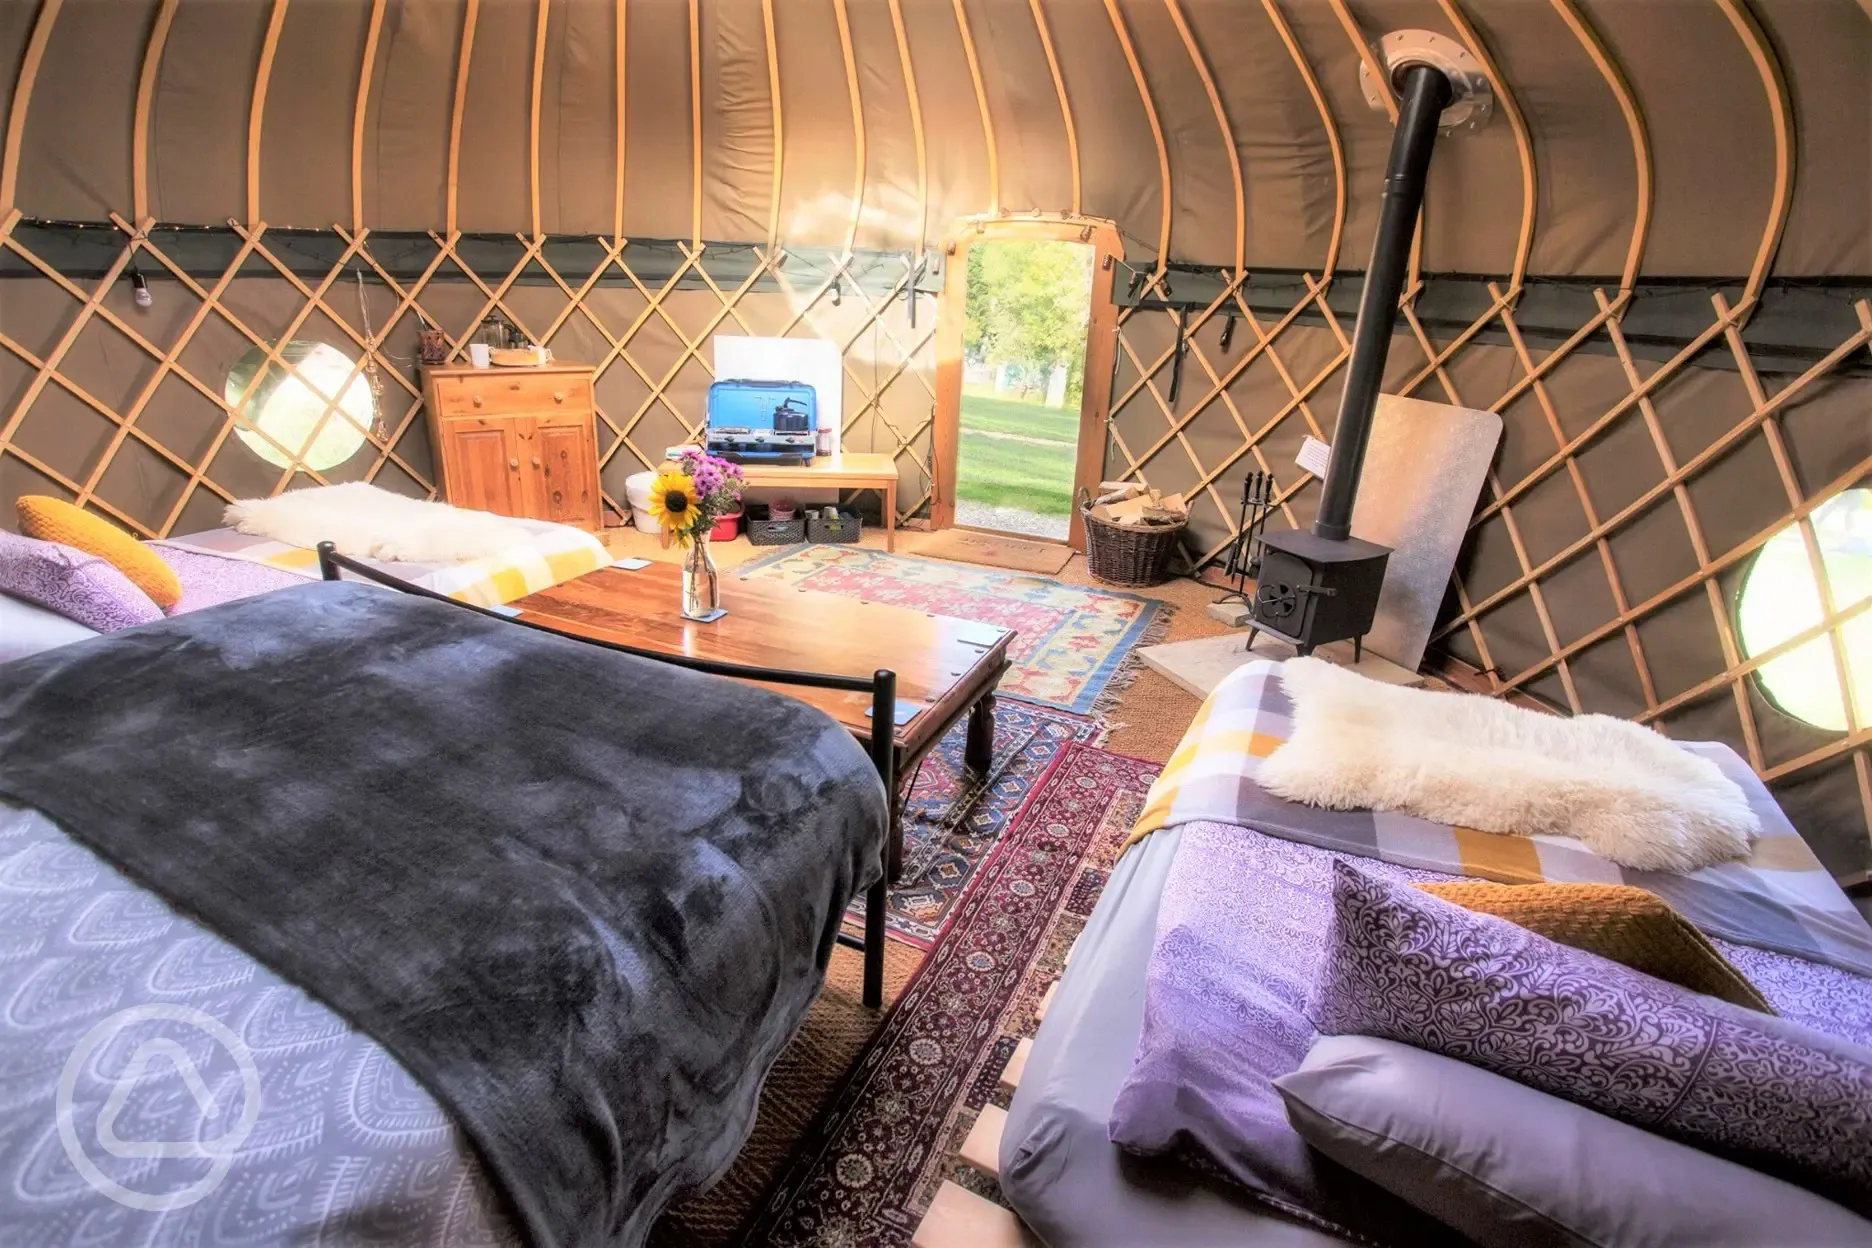 Interior view of Daisy Yurt, set up for a family